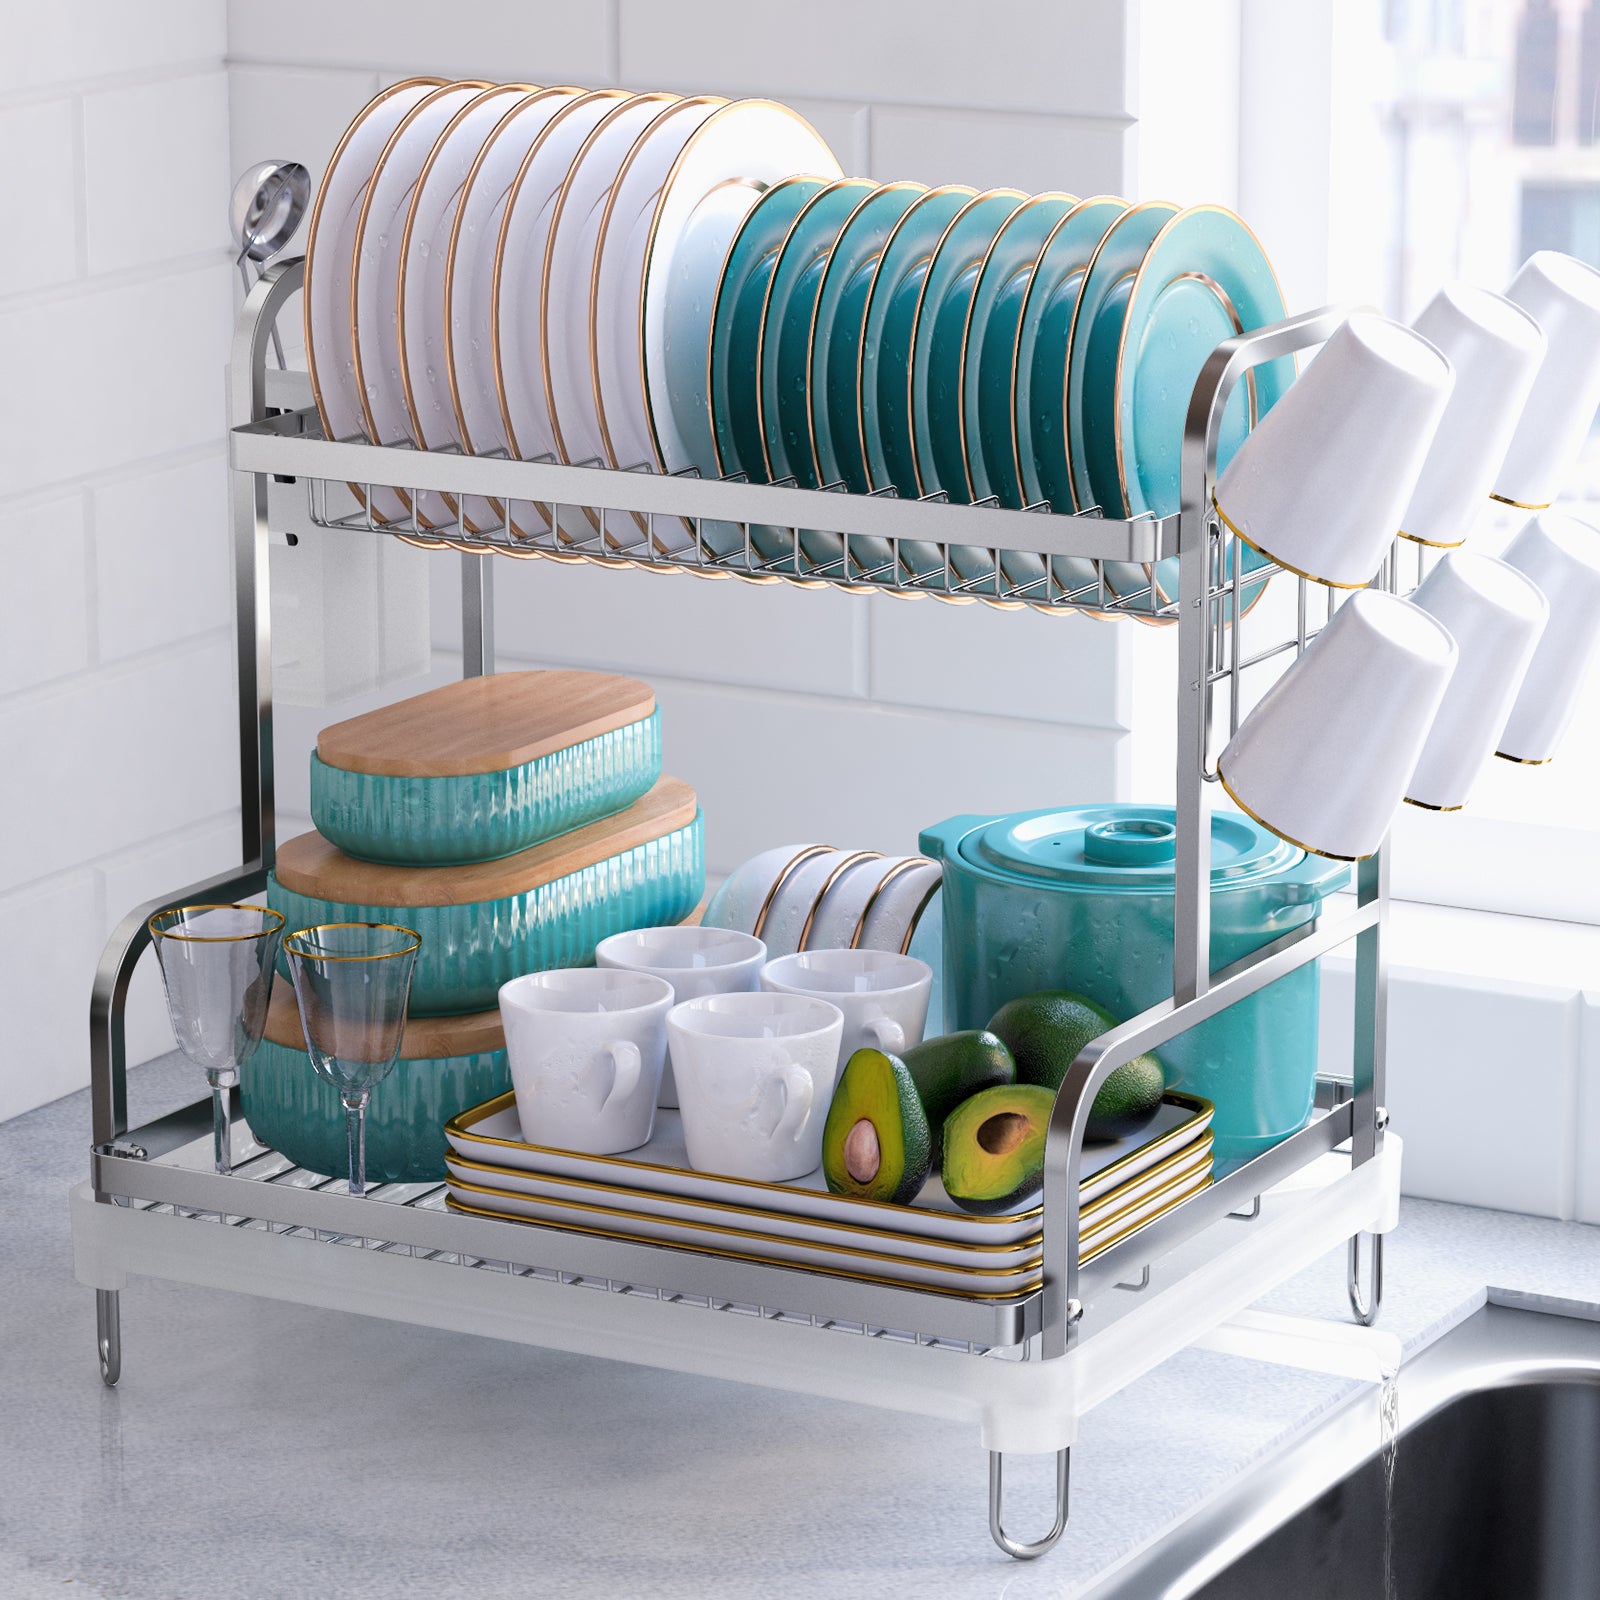 Kitsure Over-The-Sink Dish Drying Rack 2-Tier with Adjustable